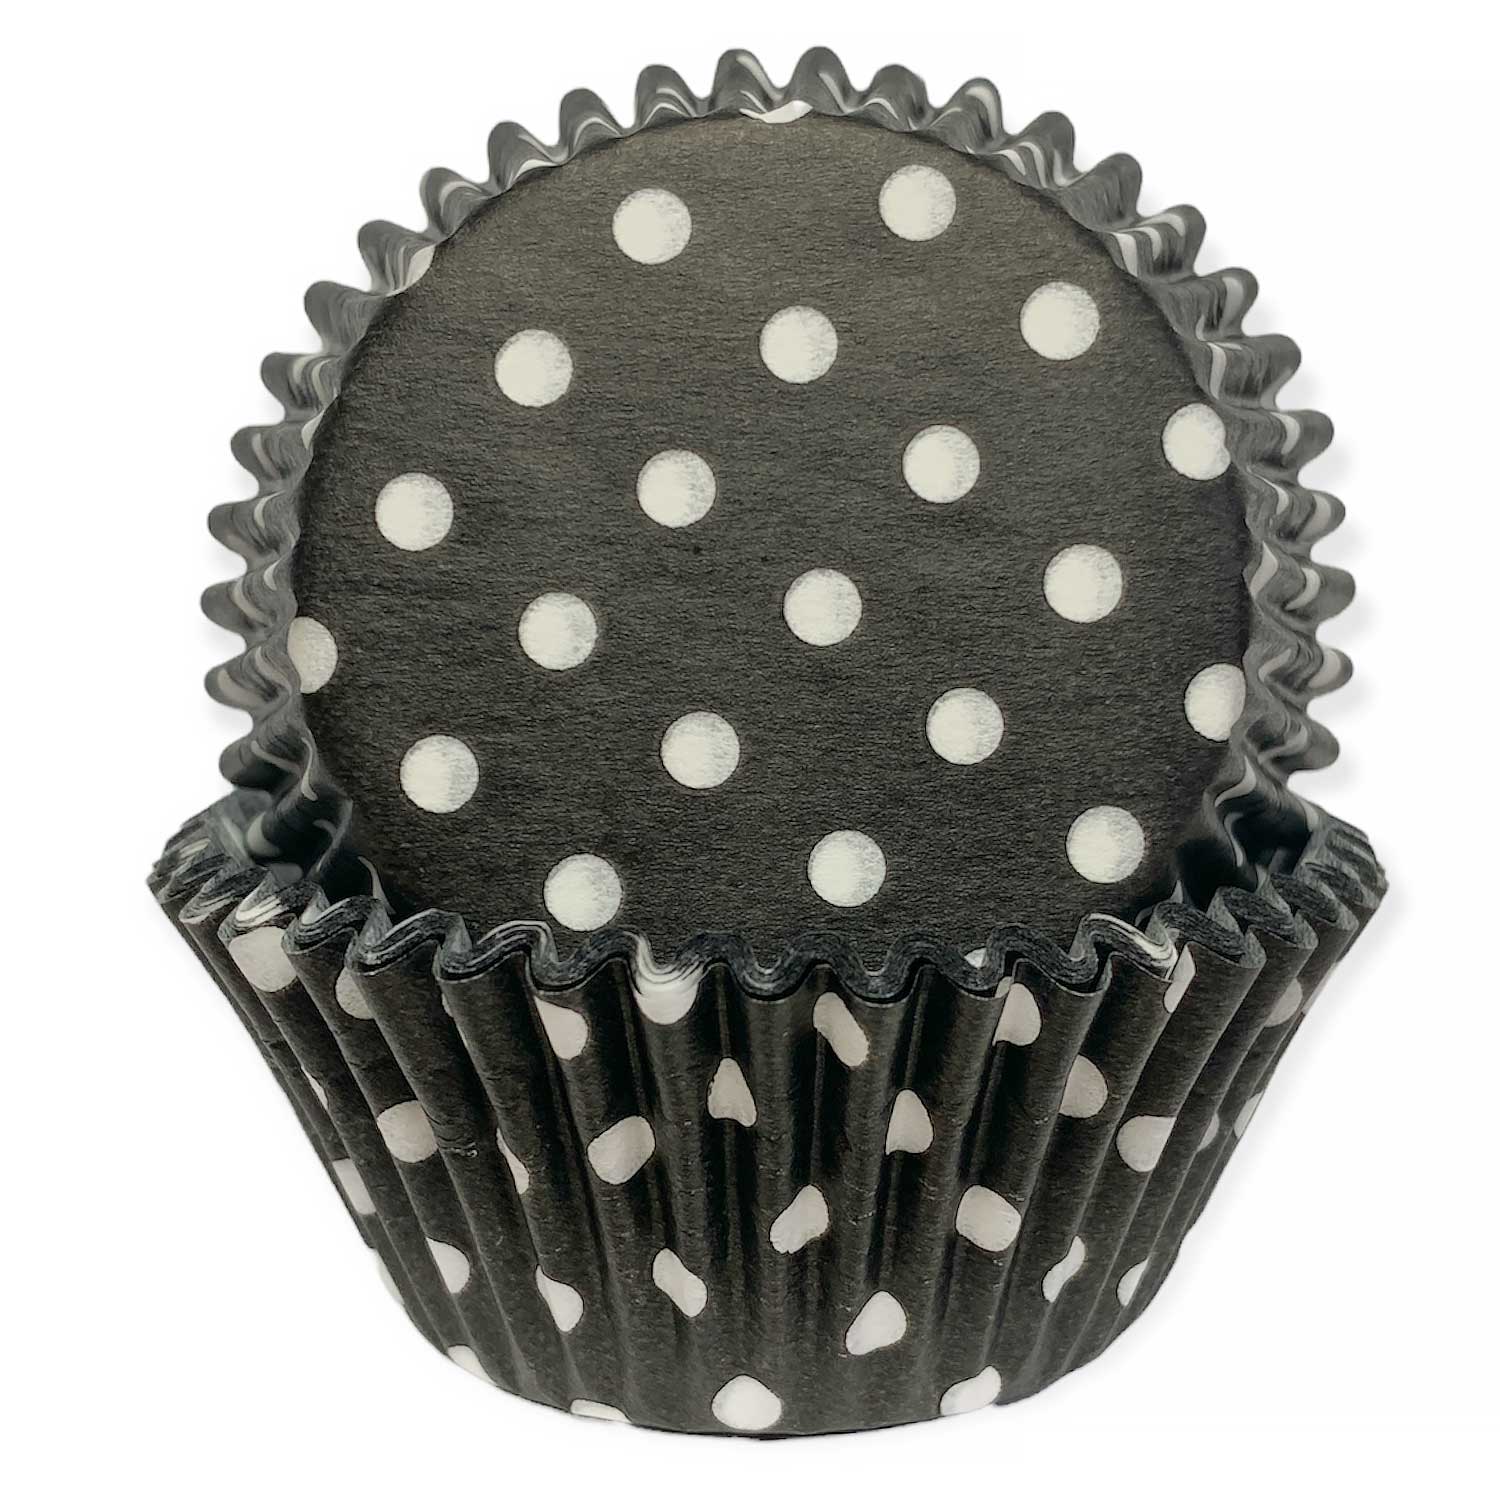 Black With White Dots Cupcake Liners